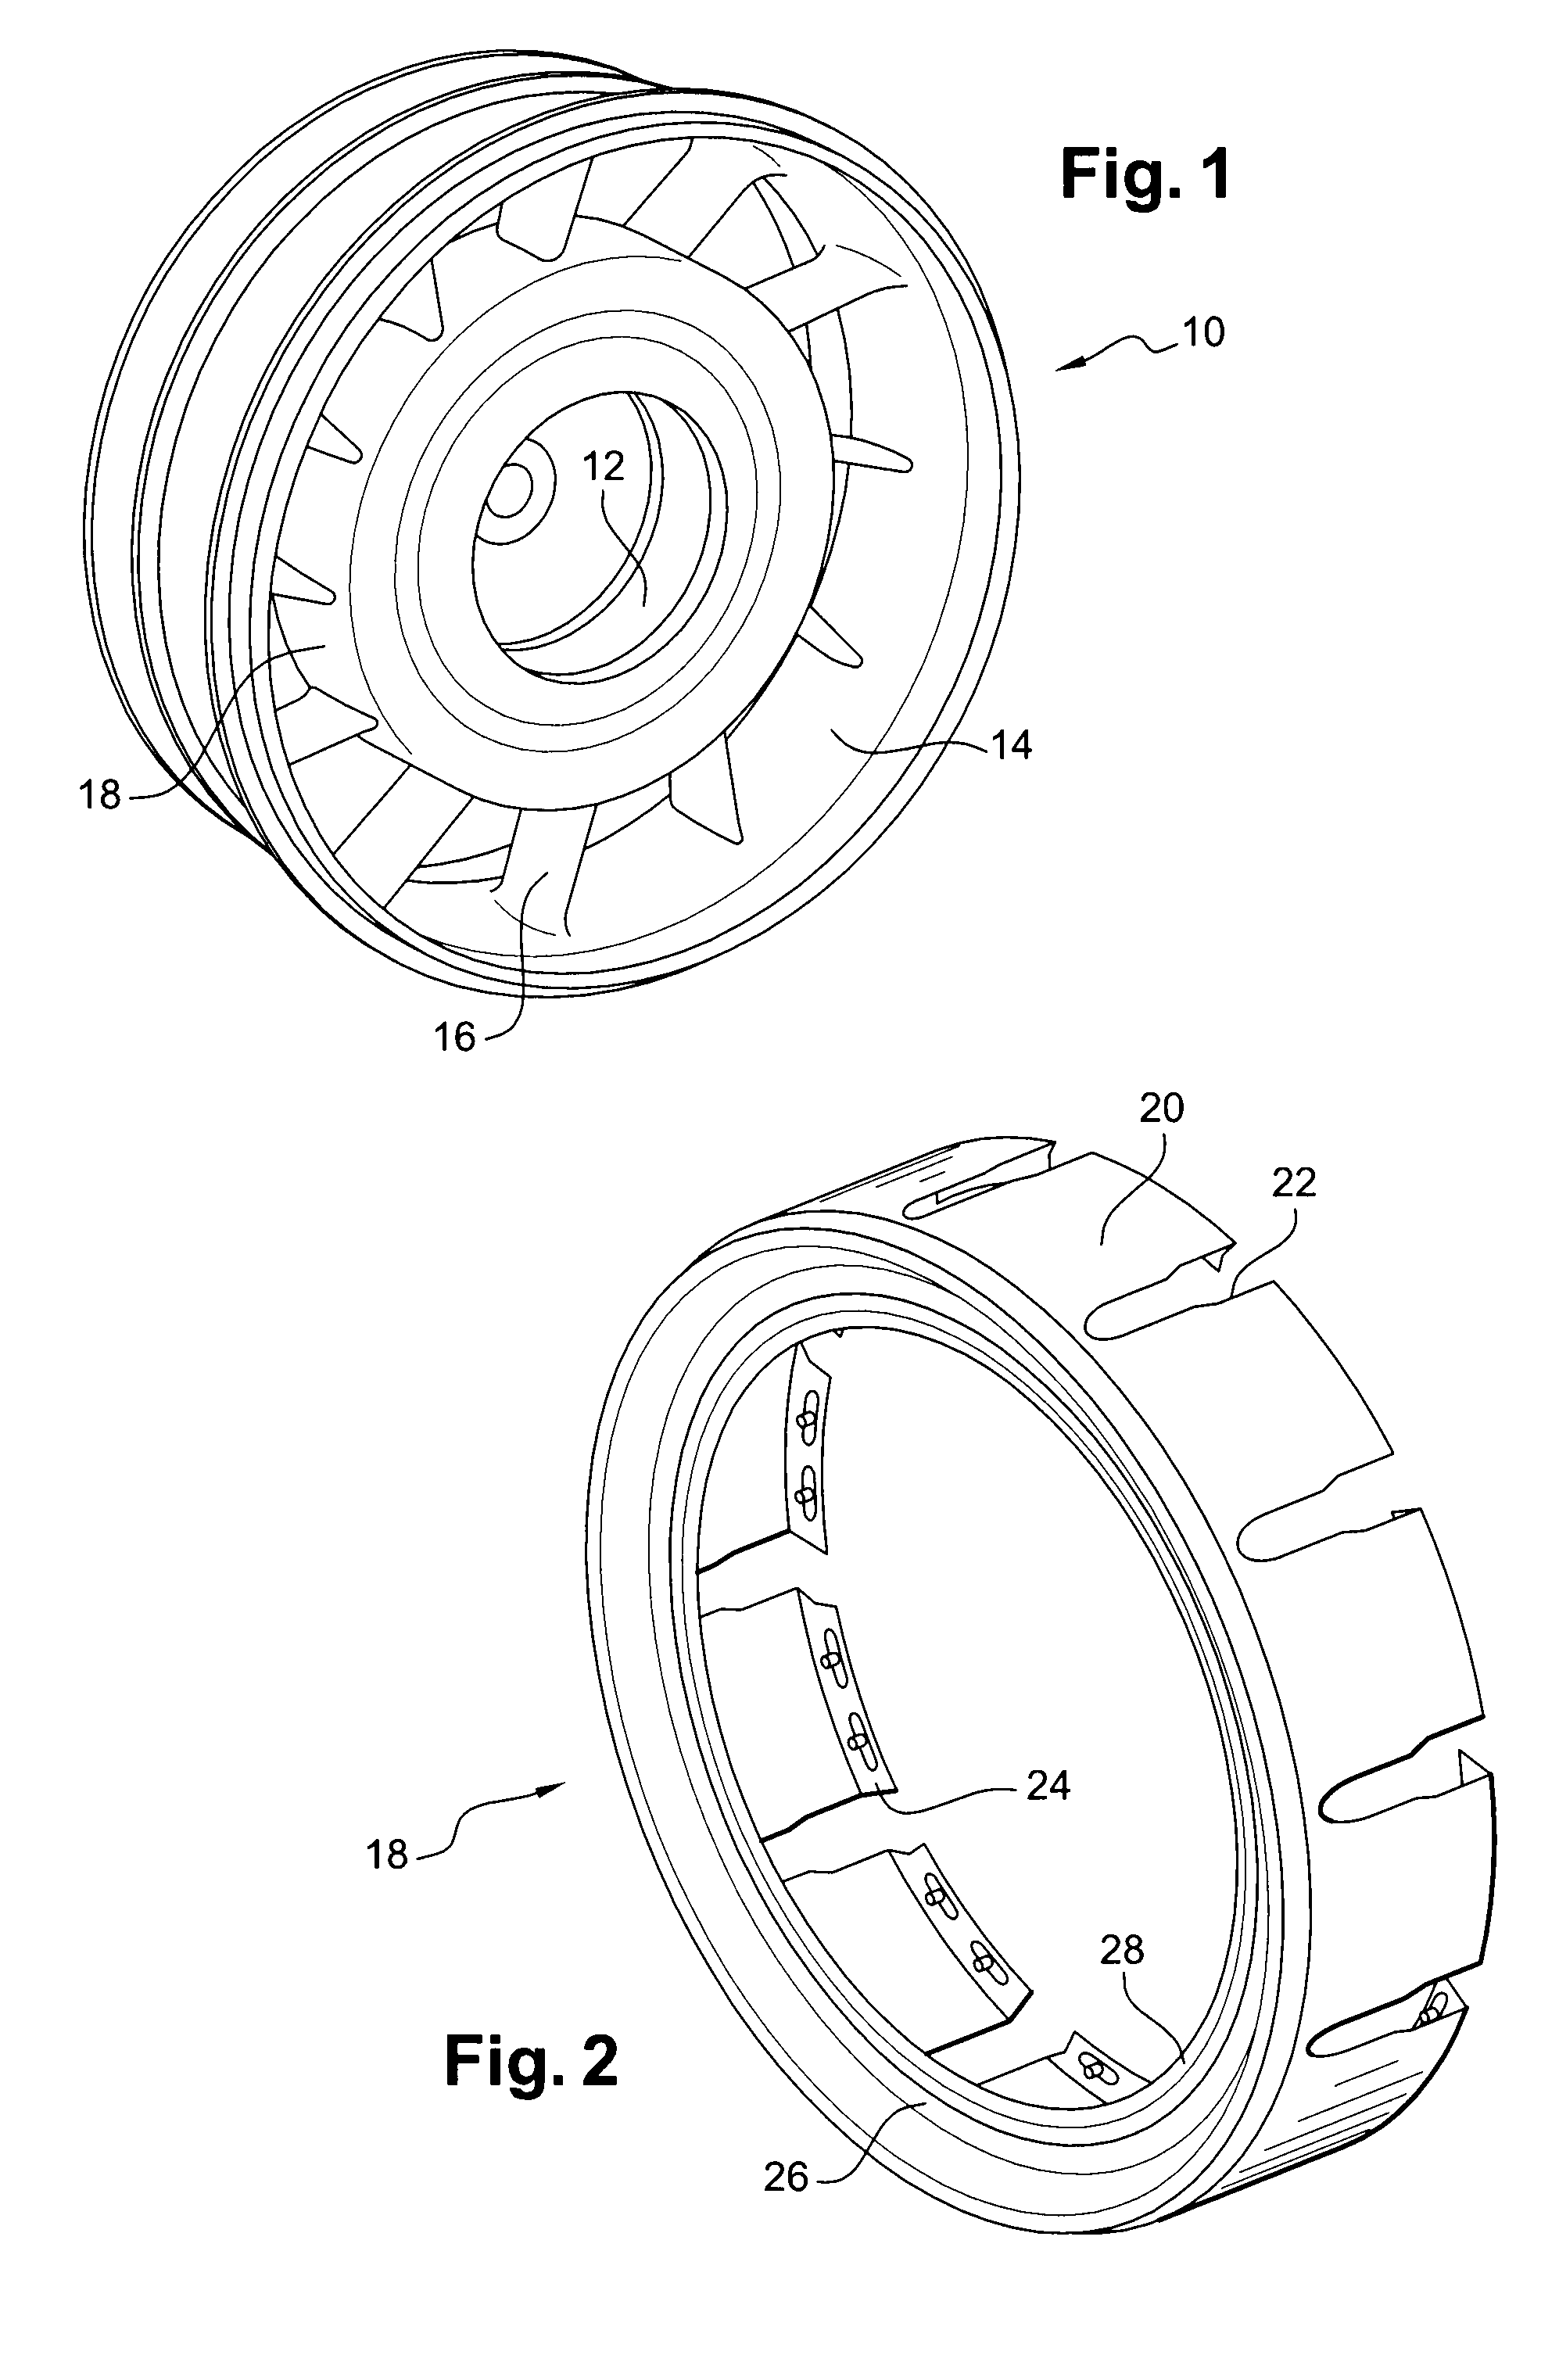 Sealing a hub cavity of an exhaust casing in a turbomachine